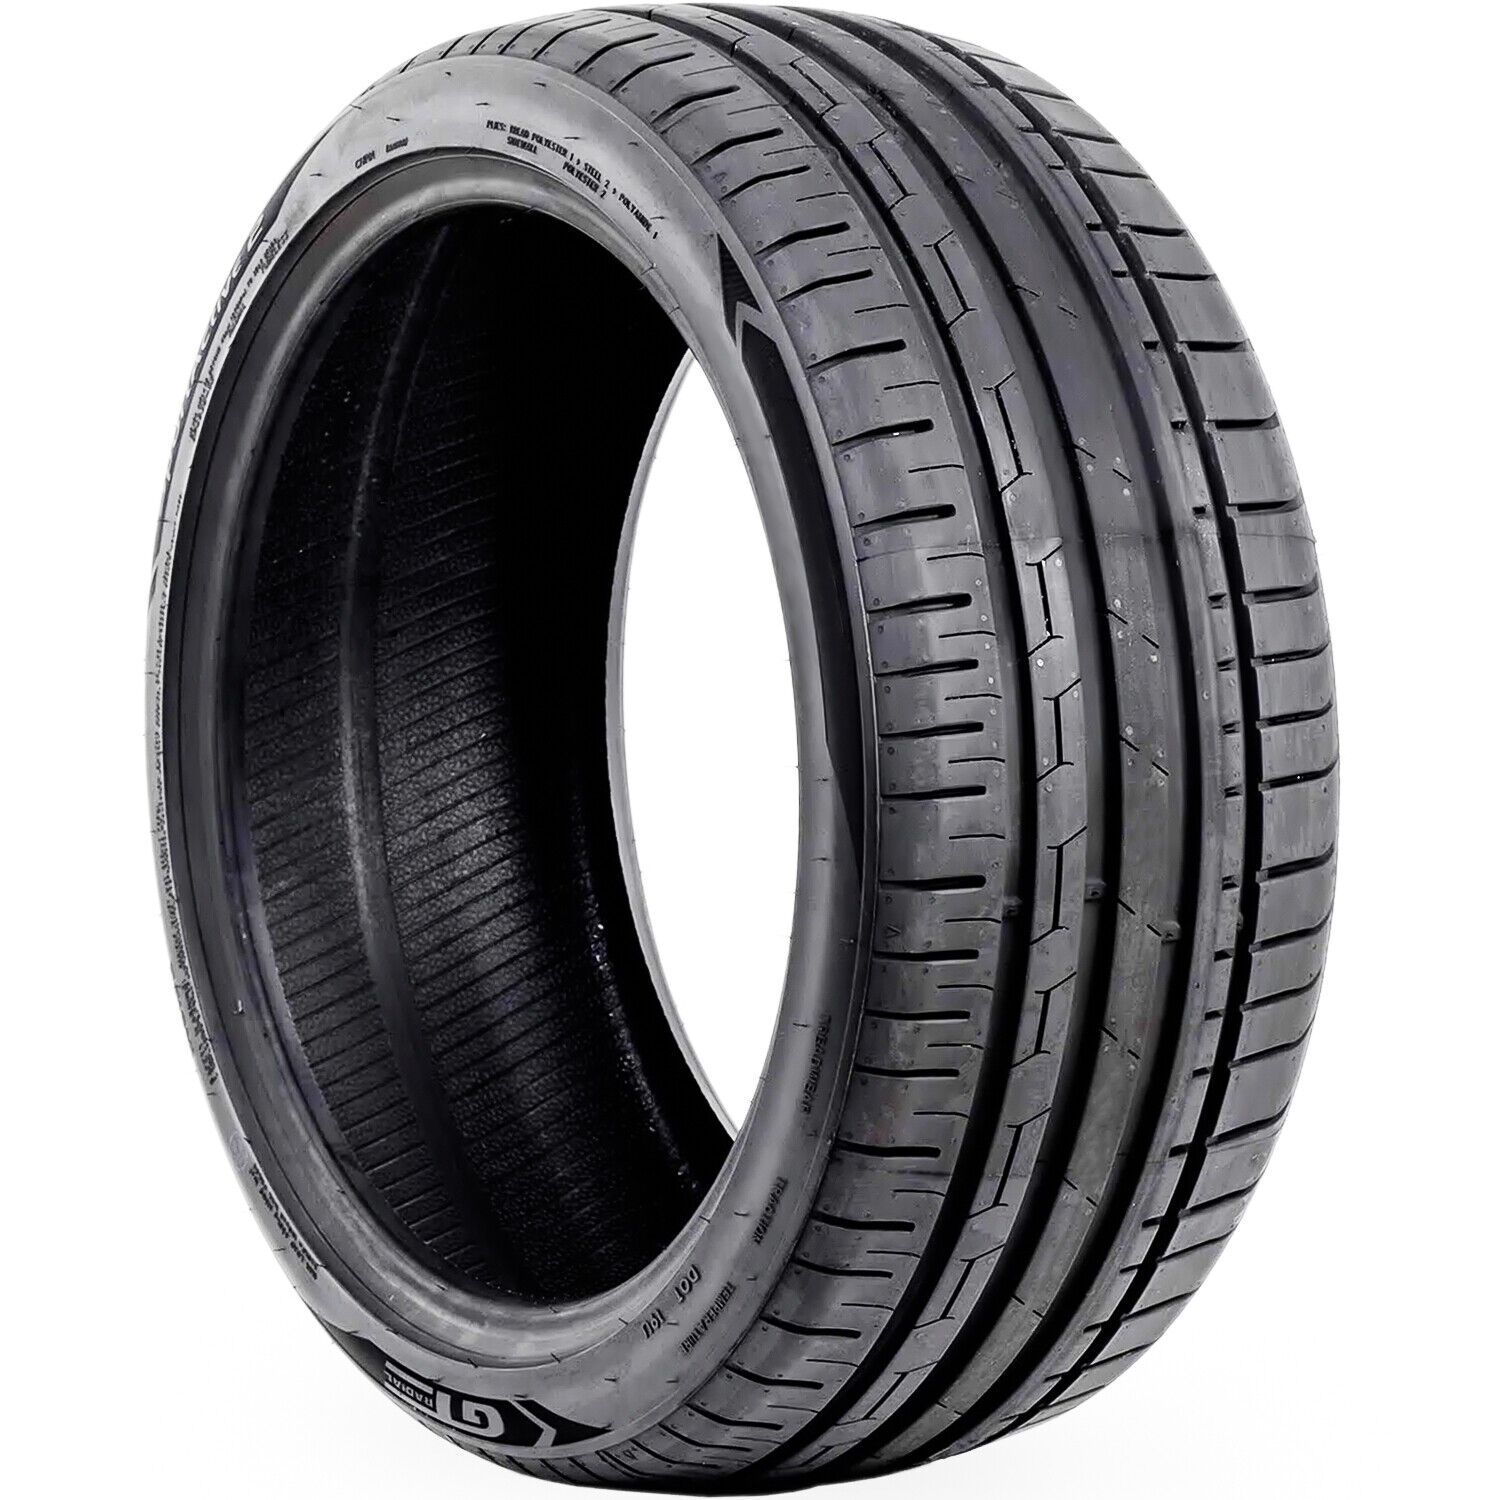 Tire GT Radial SportActive 2 235/40R19 96Y XL High Performance